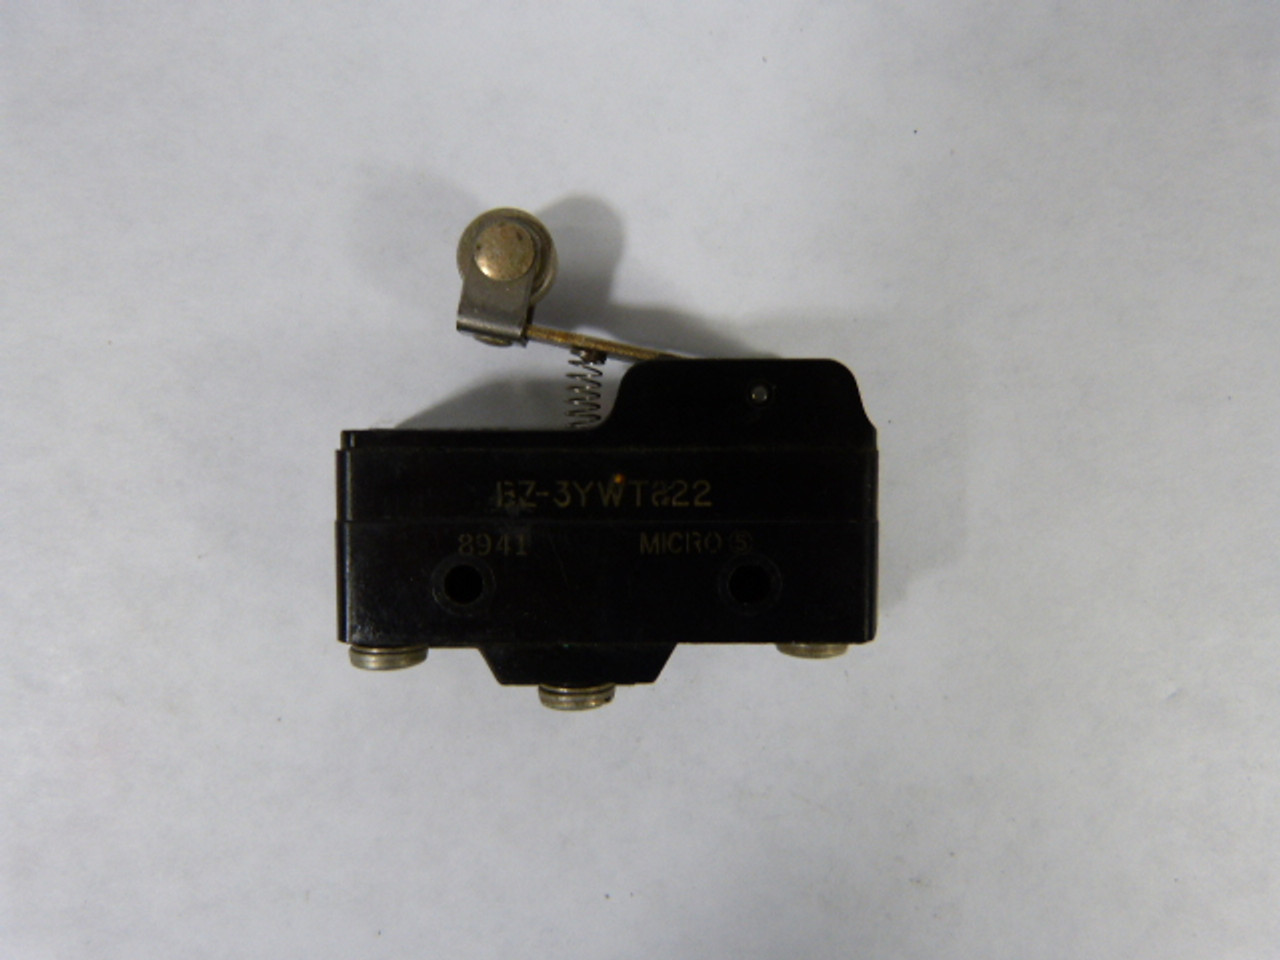 Microswitch BZ-3YWT822 Limit Switch with Roller Lever 5A 250VAC USED